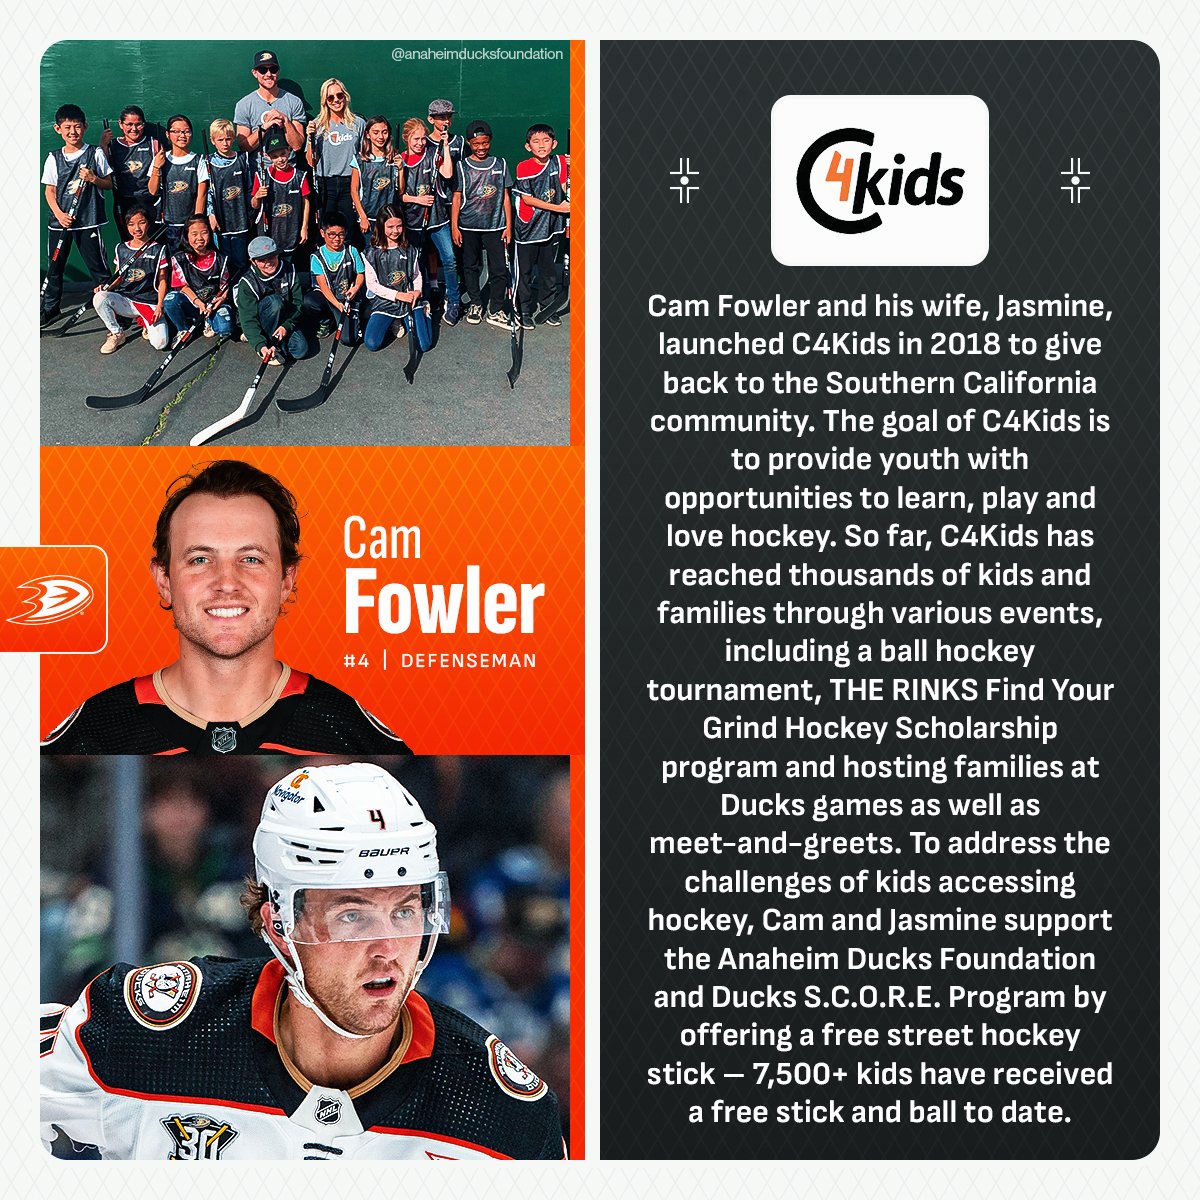 Cam Fowler and his wife, Jasmine, launched their own charitable programming, C4Kids, in 2018 to give back to the Southern California community and increase accessibility to hockey.  Catch him and the @AnaheimDucks in action tonight on Sportsnet One.